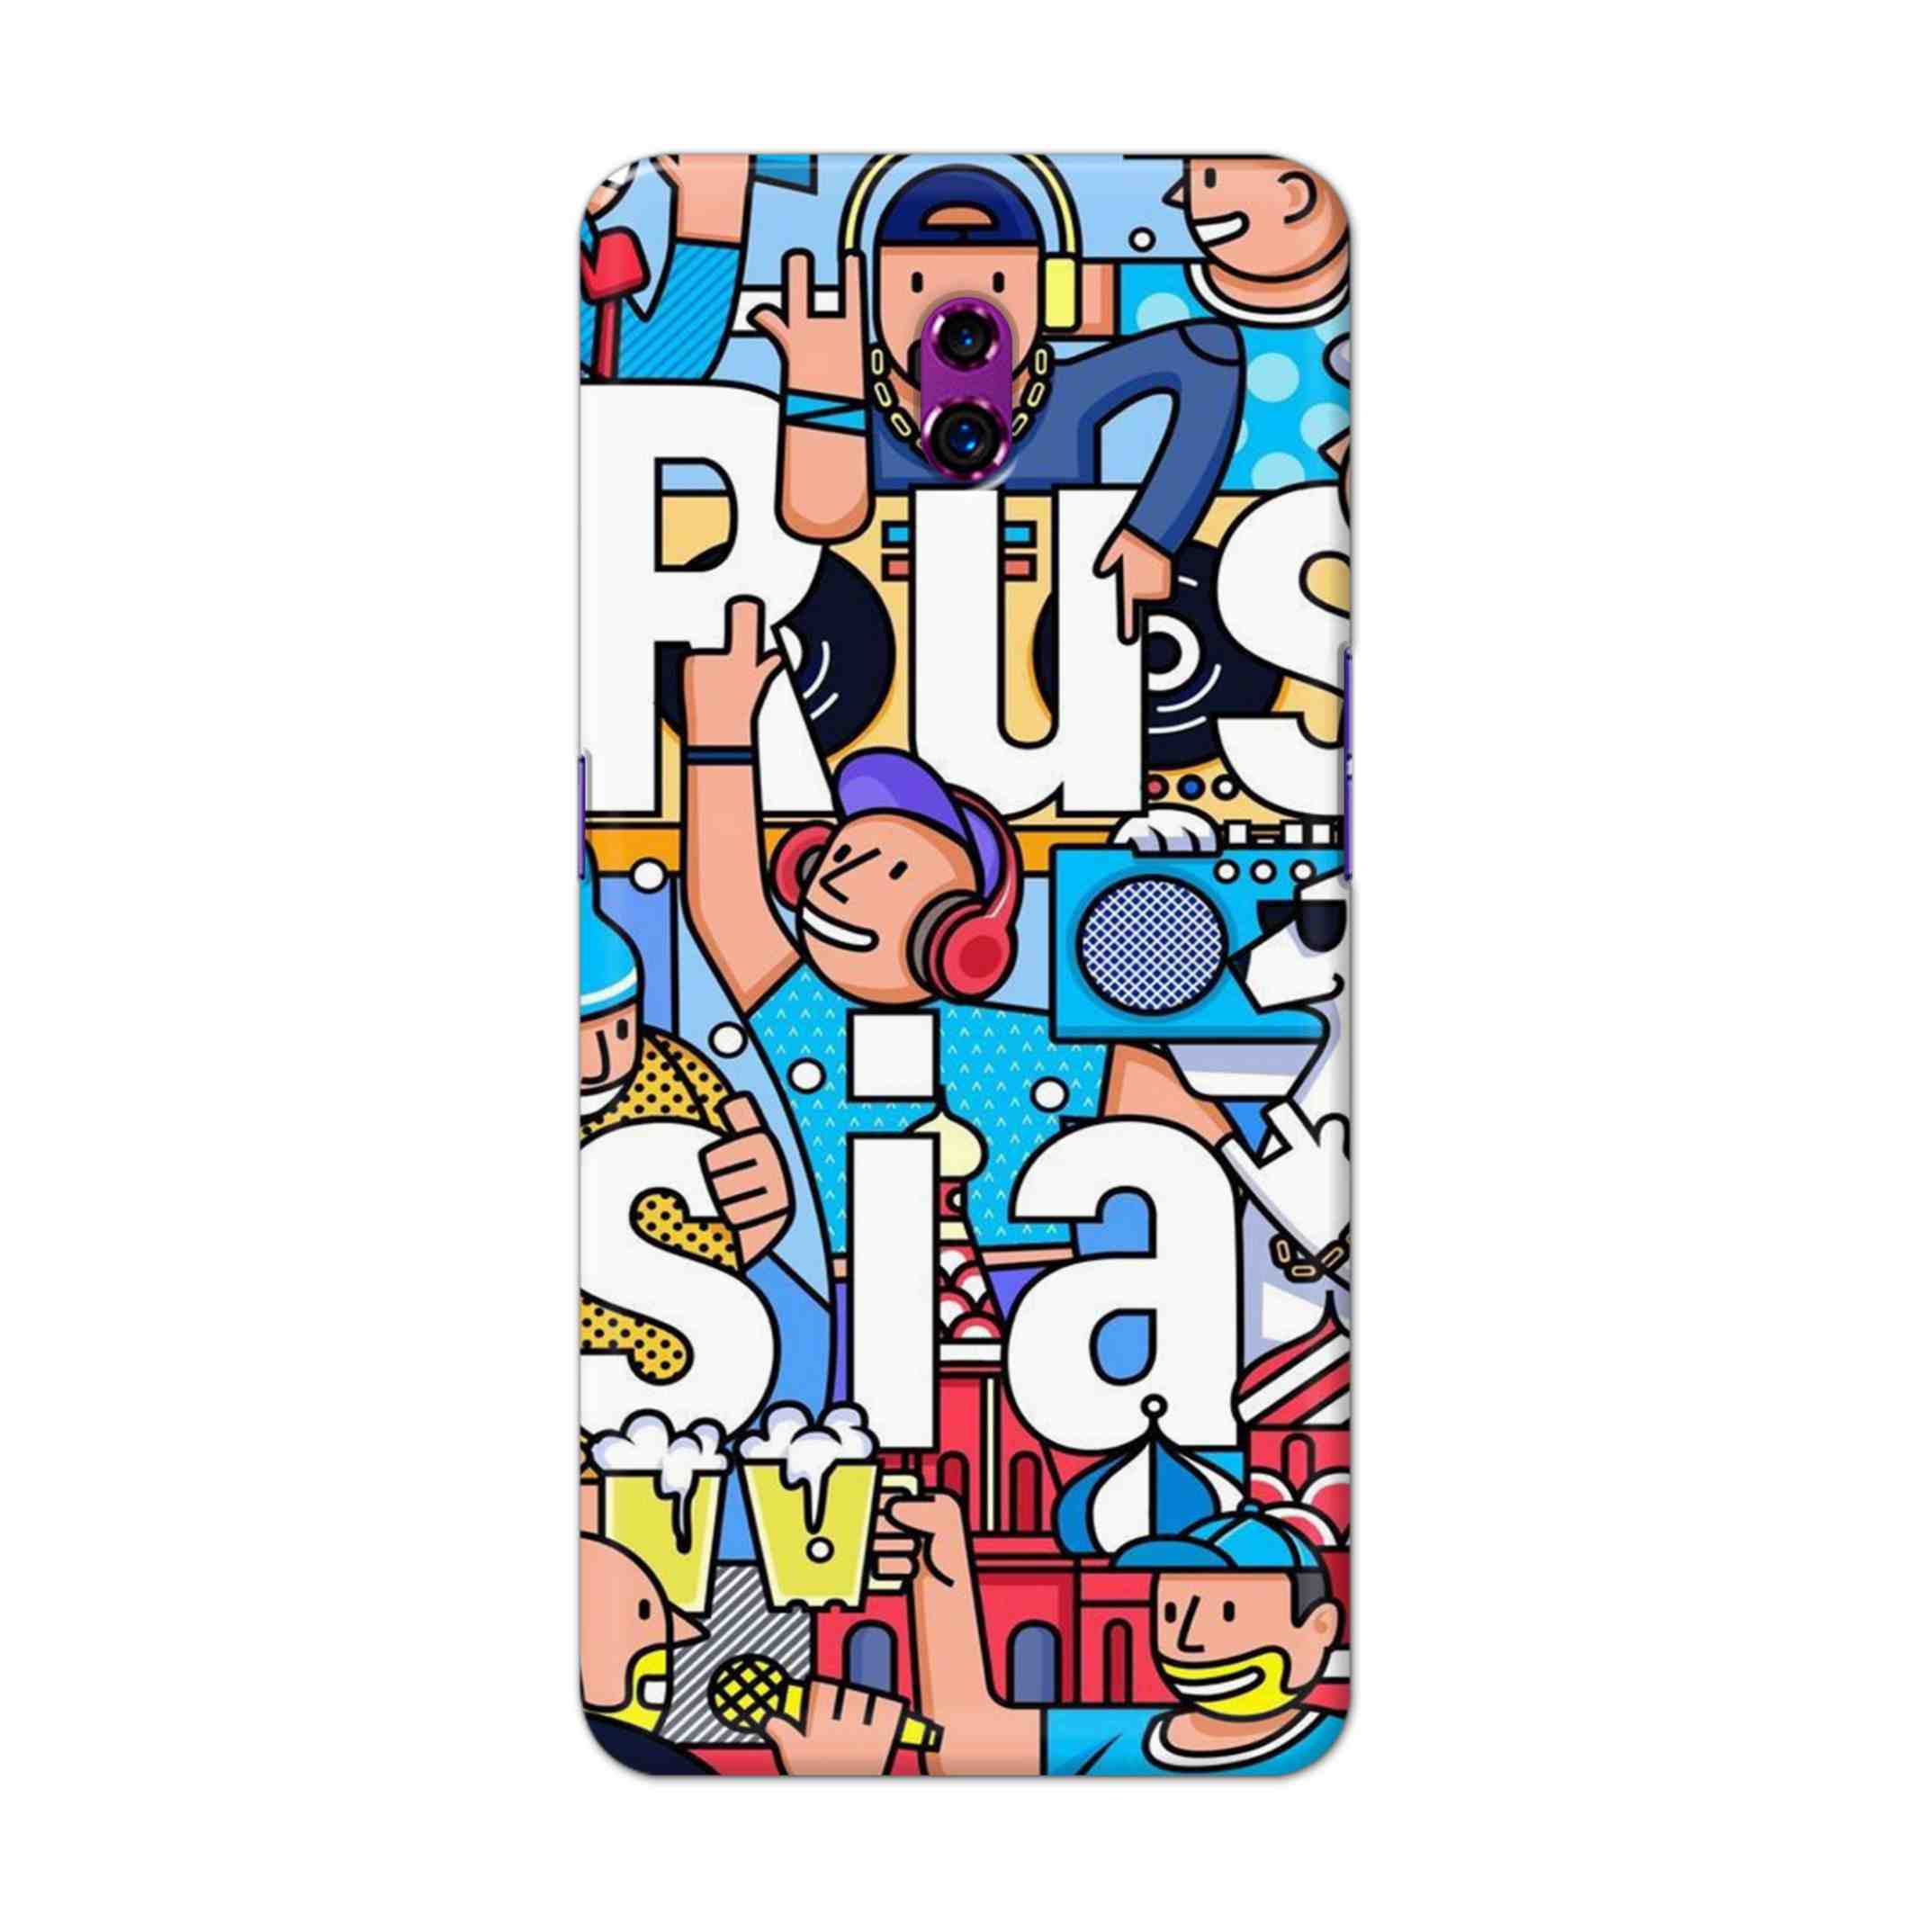 Buy Russia Hard Back Mobile Phone Case Cover For Oppo Reno Online